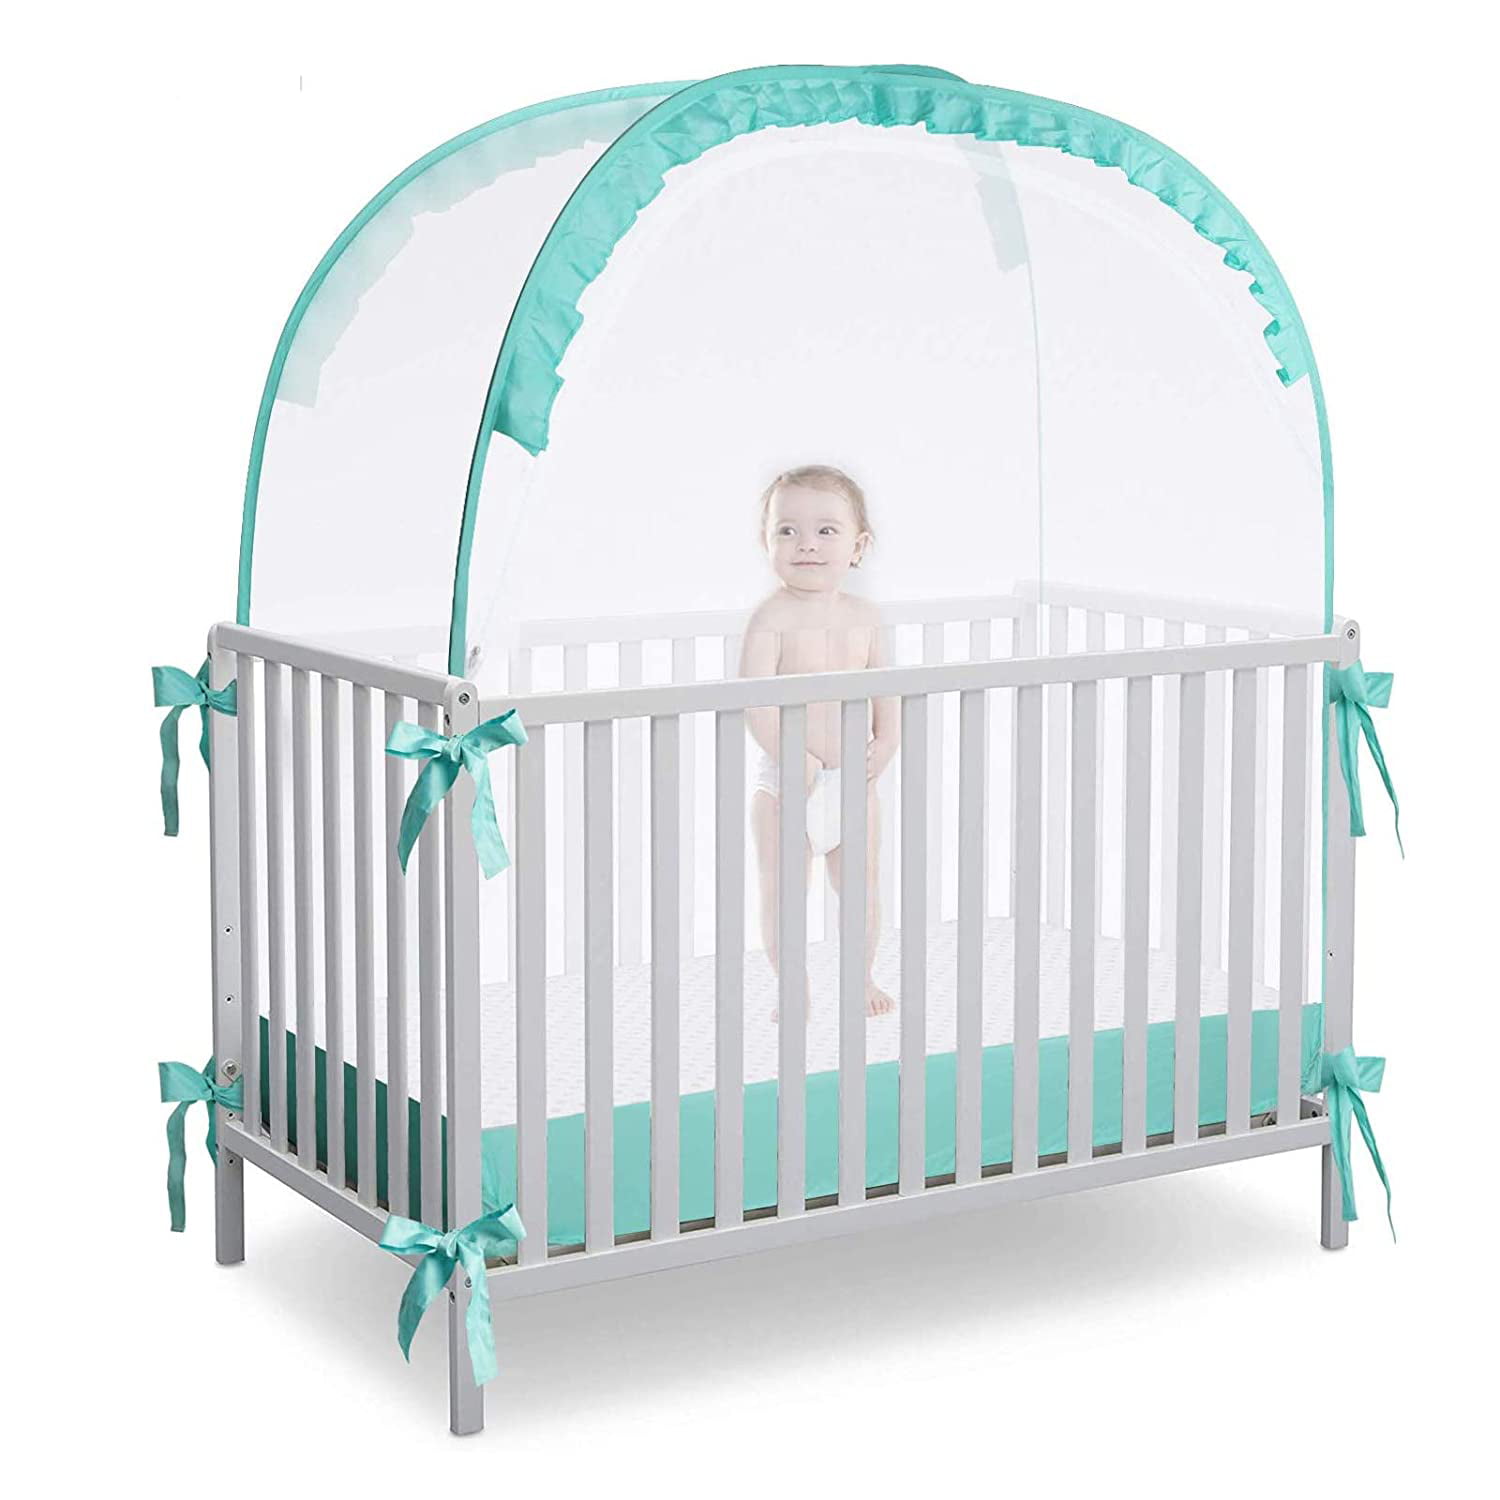 Houseables Baby Crib Safety Net Mosquito Babies Bed Netting Tent Babies HOT US 